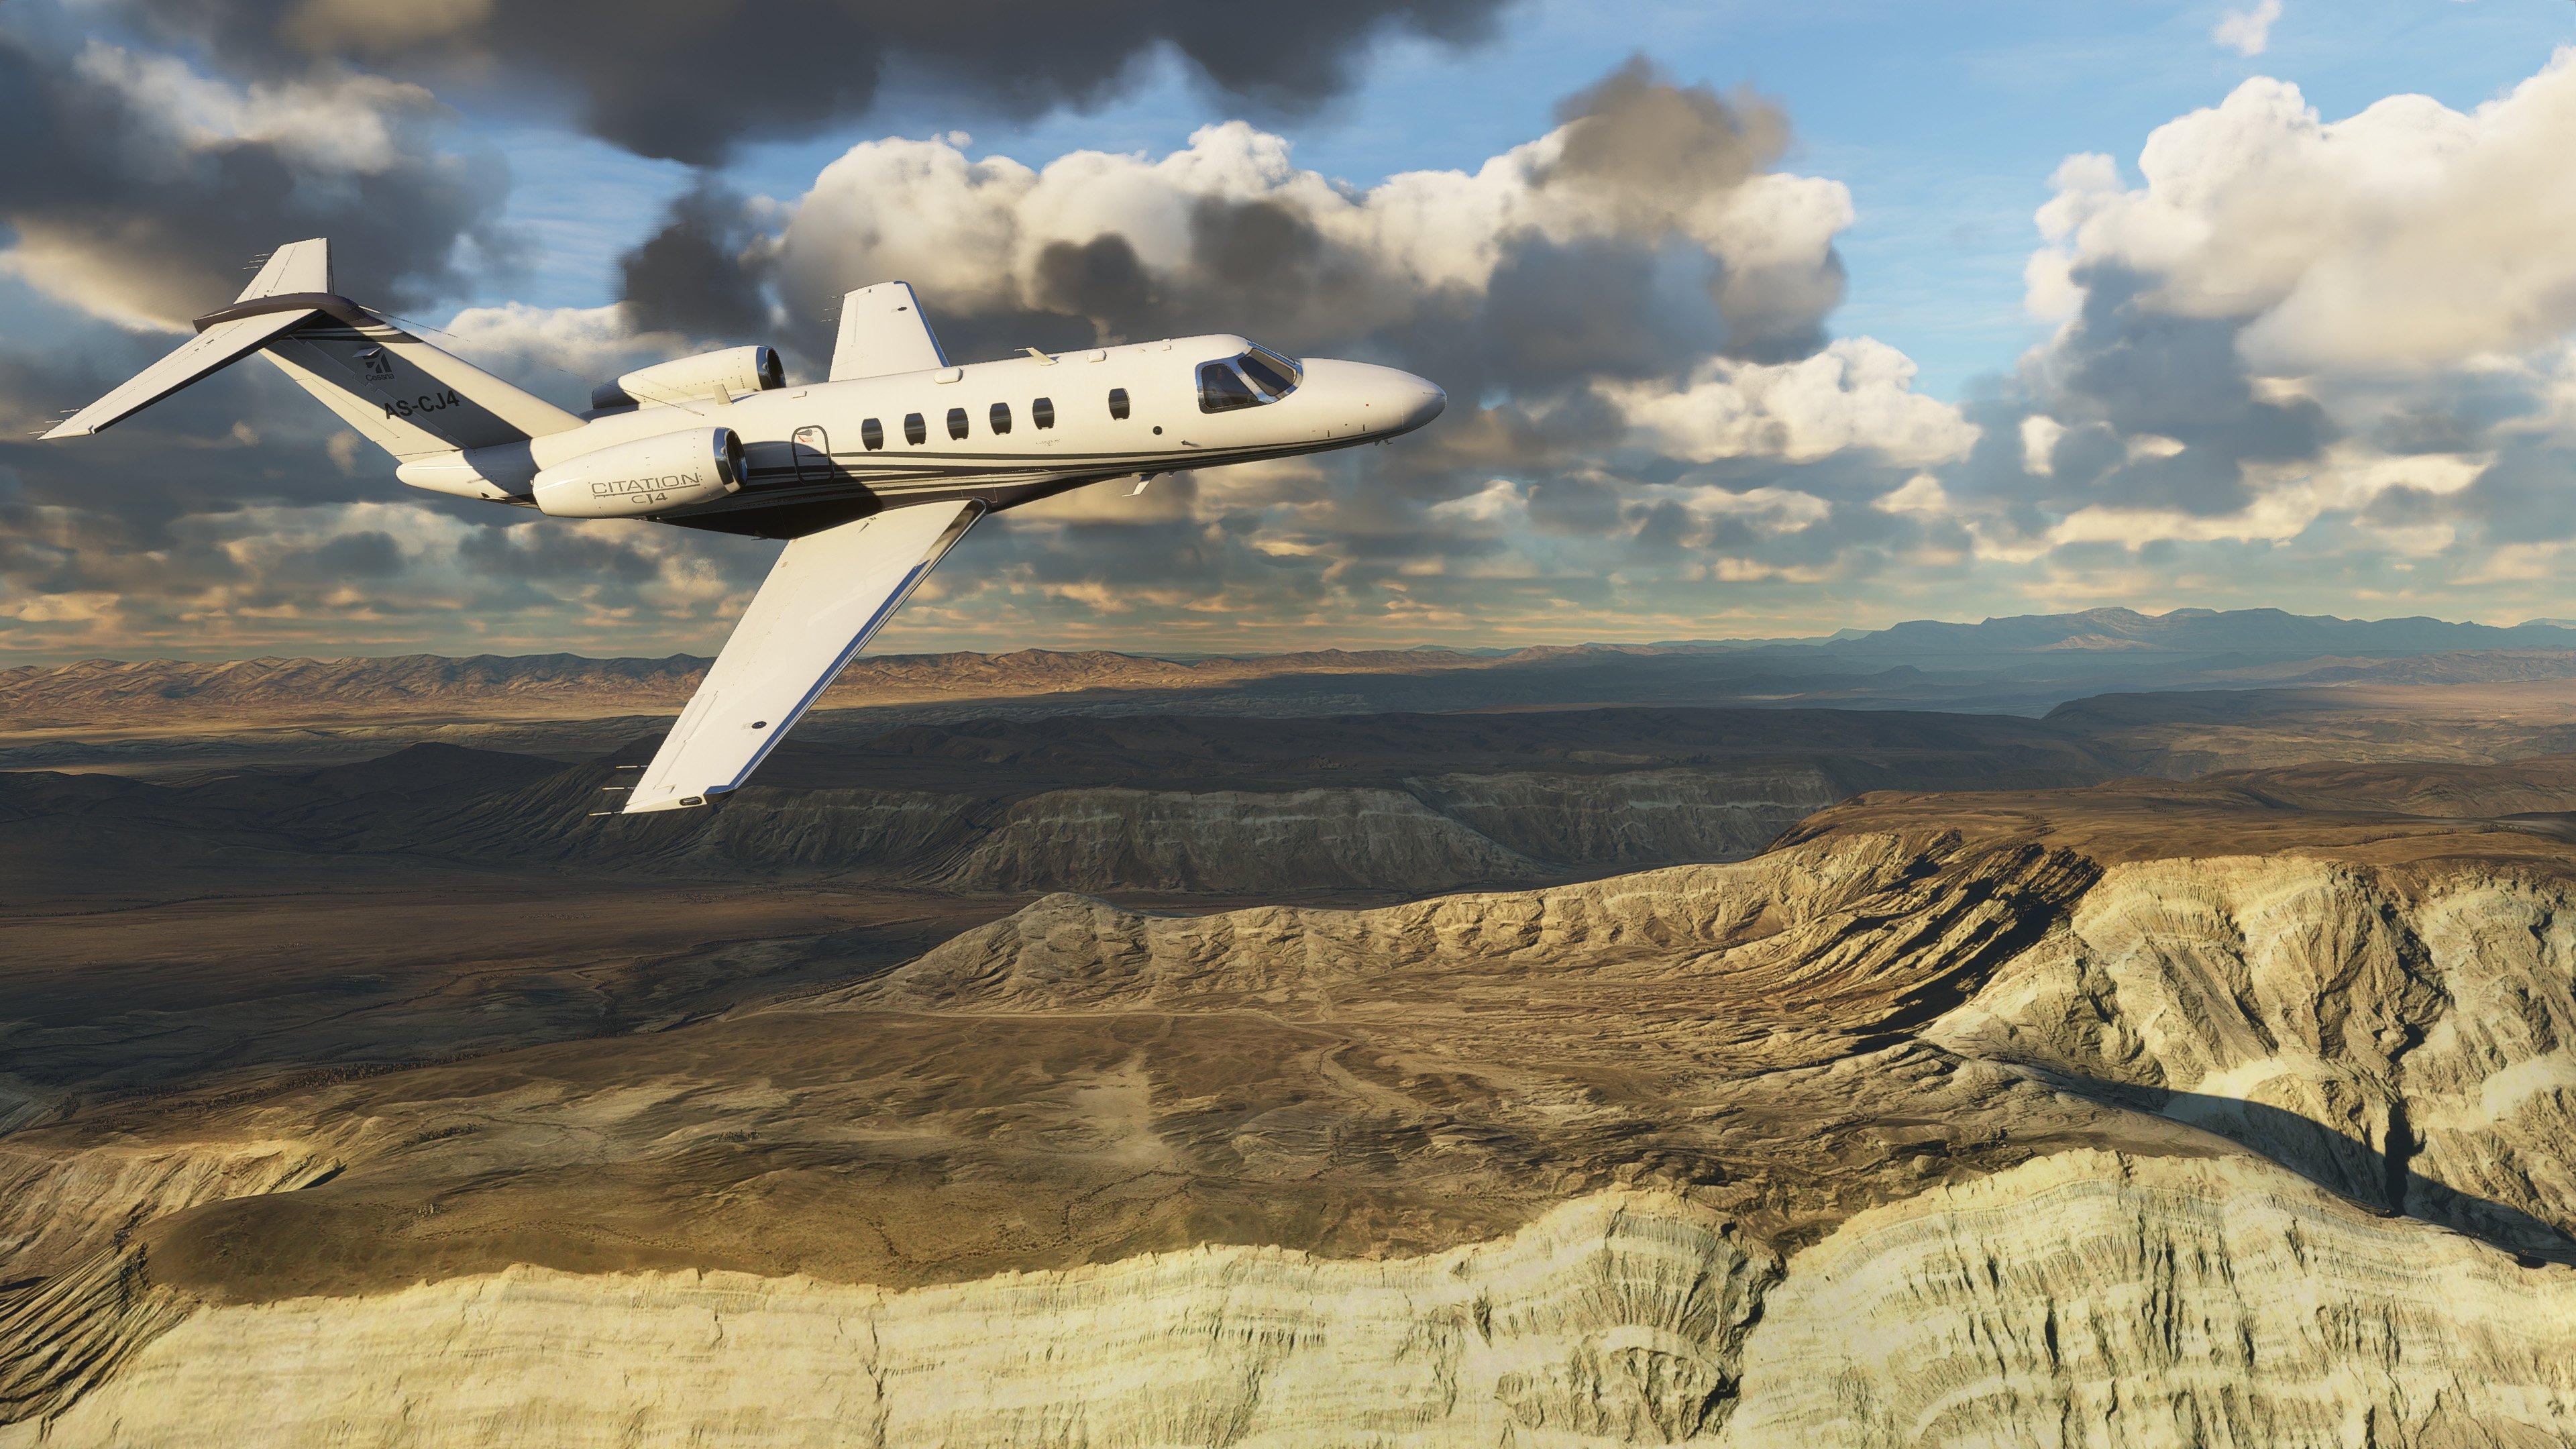 Microsoft Flight Simulator ✈️ on X: Did you know that the Xbox Game  Studios Steam Spring Sale is ongoing? 🌷 You can currently get  #MicrosoftFlightSimulator for 25% off on @Steam!    /